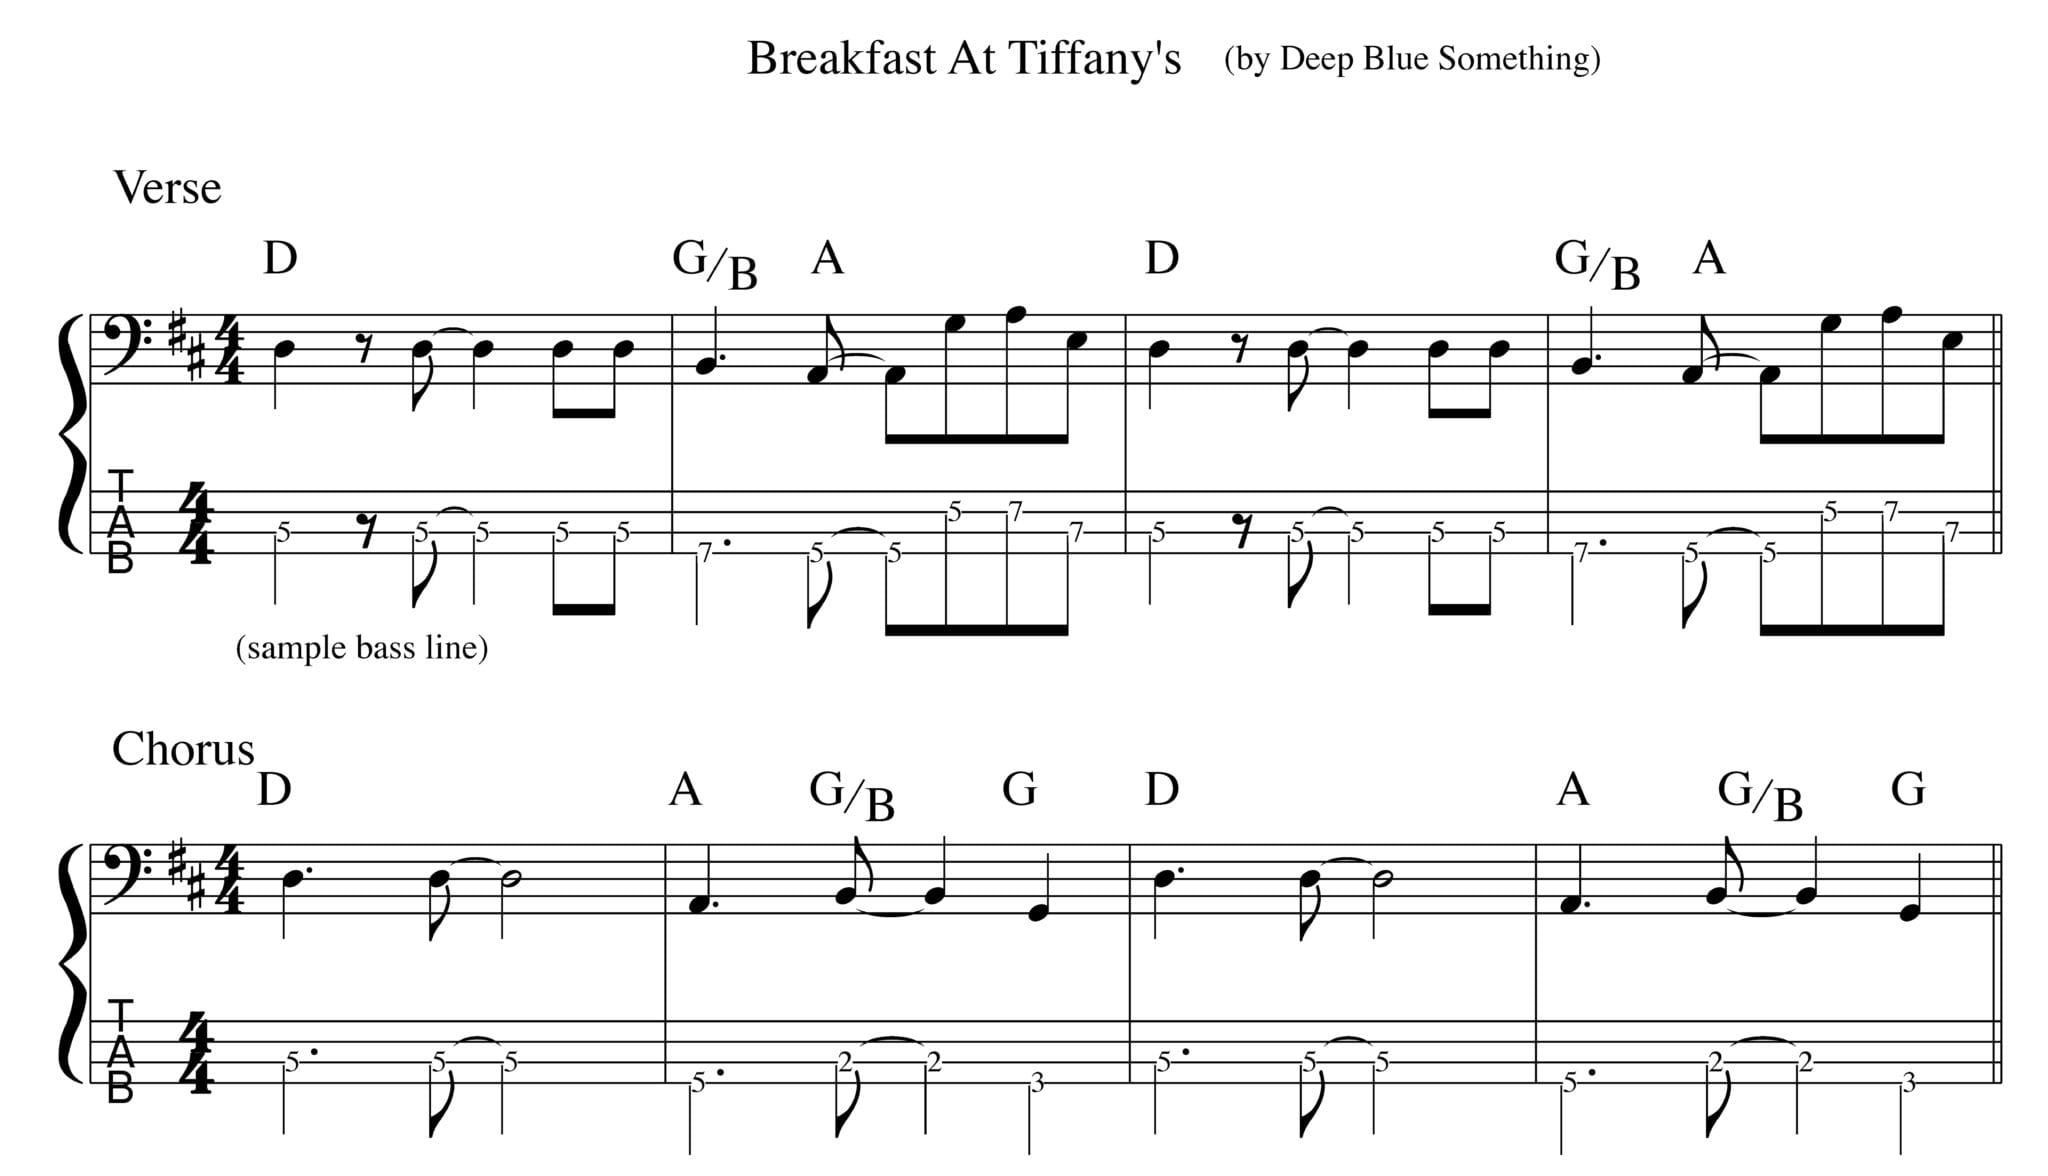 Breakfast at Tiffany's inversions Bass bass line music theory